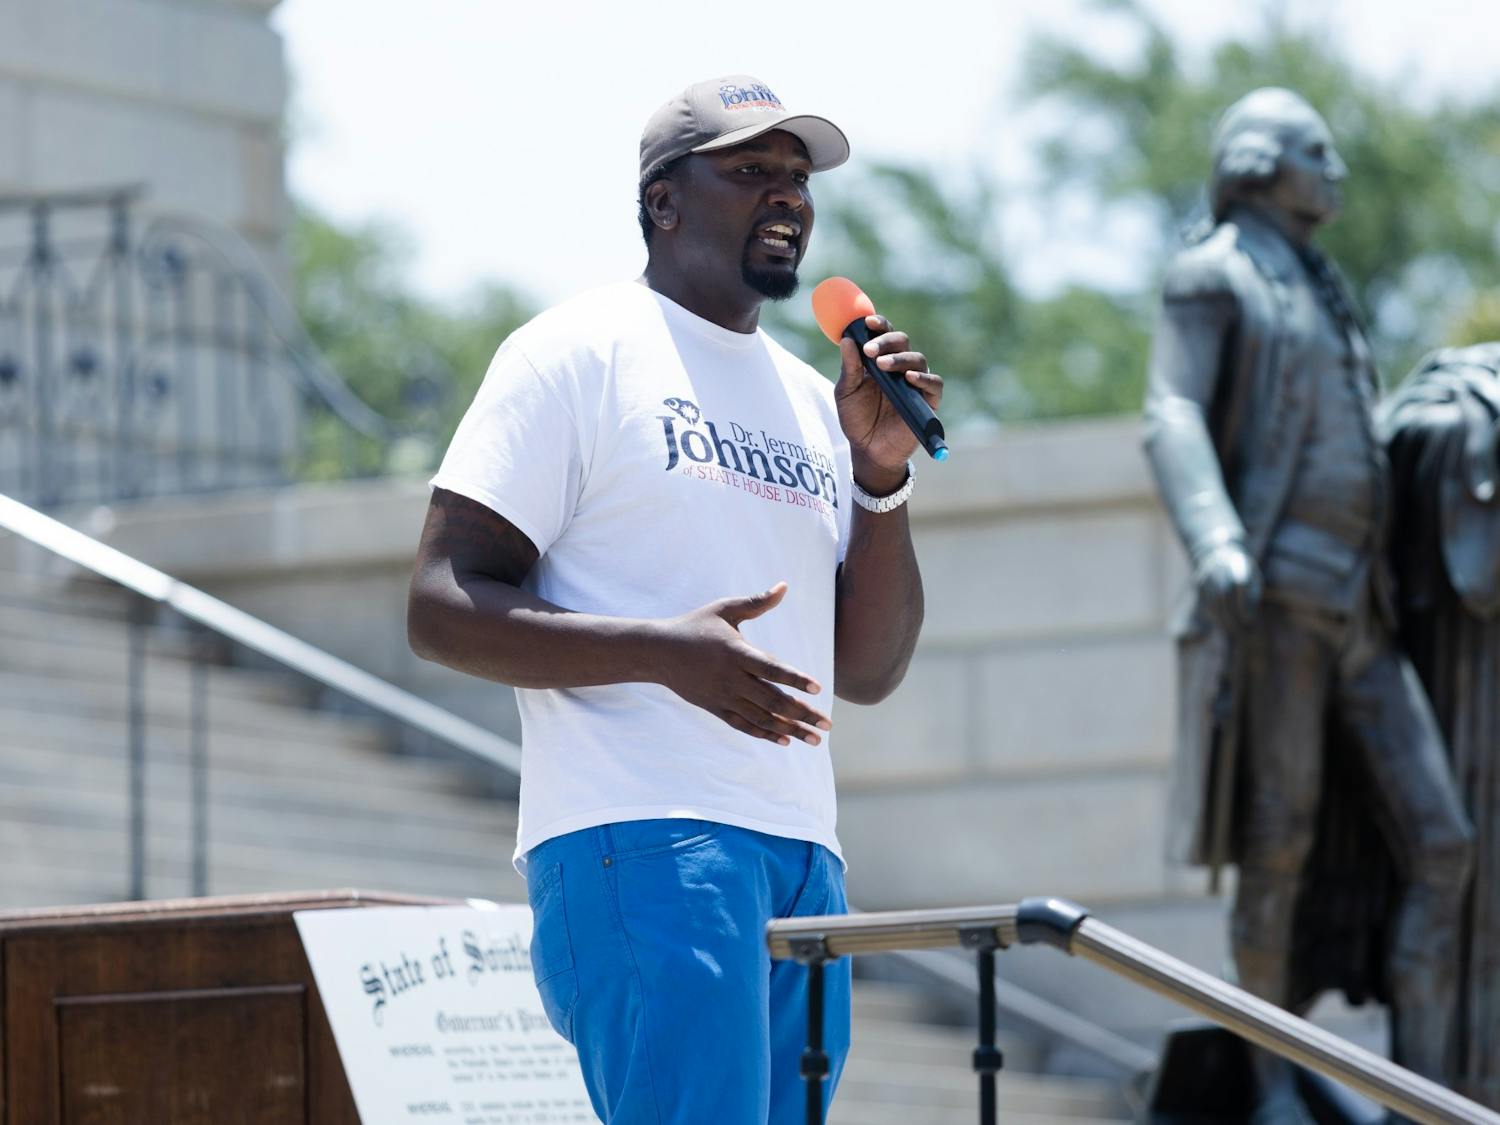 Rep. Jermaine Johnson (D-Richland) speaks to the crowd during the "Wear Orange" rally on June 4, 2022. Speakers at the rally called for lawmakers to combat gun violence.&nbsp;